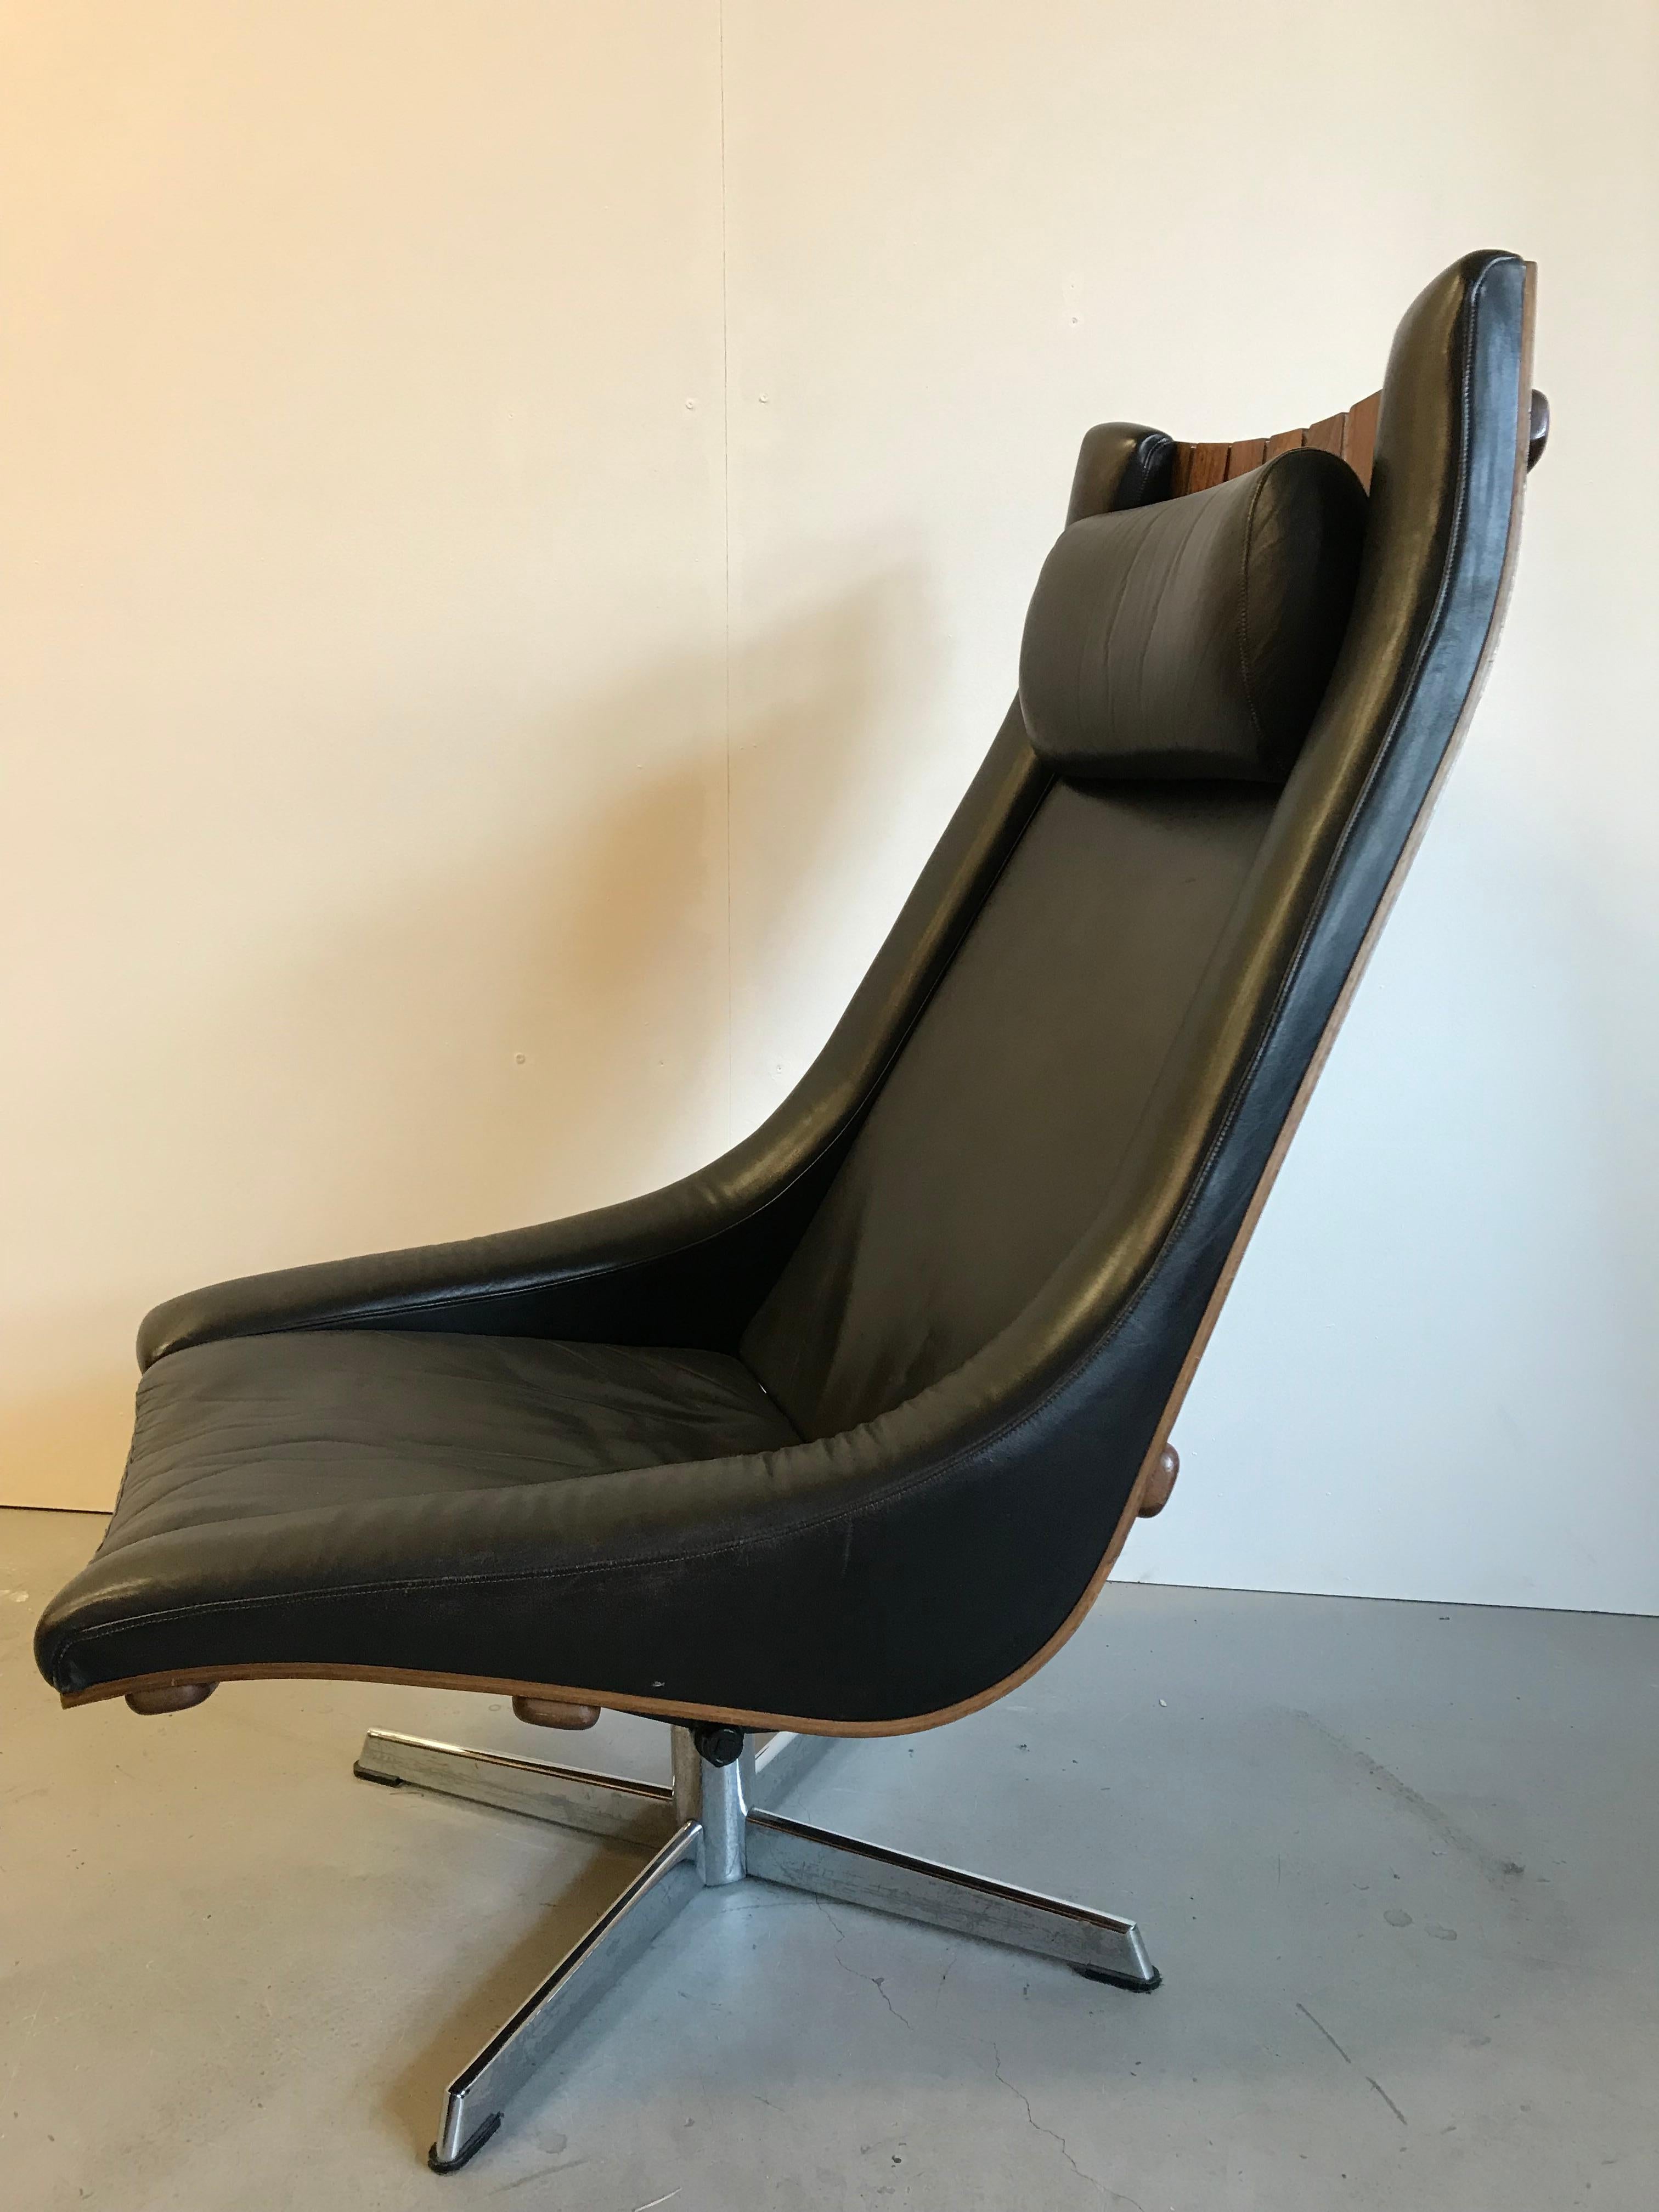 Special Hans Brattrud lounge chair. Designed in the 1960s.
This Scandia chair for Hove Mobler is executed in rosewood. It has a chrome swivel base and can be called exclusive because of its leather upholstery. This in turn gives a beautiful